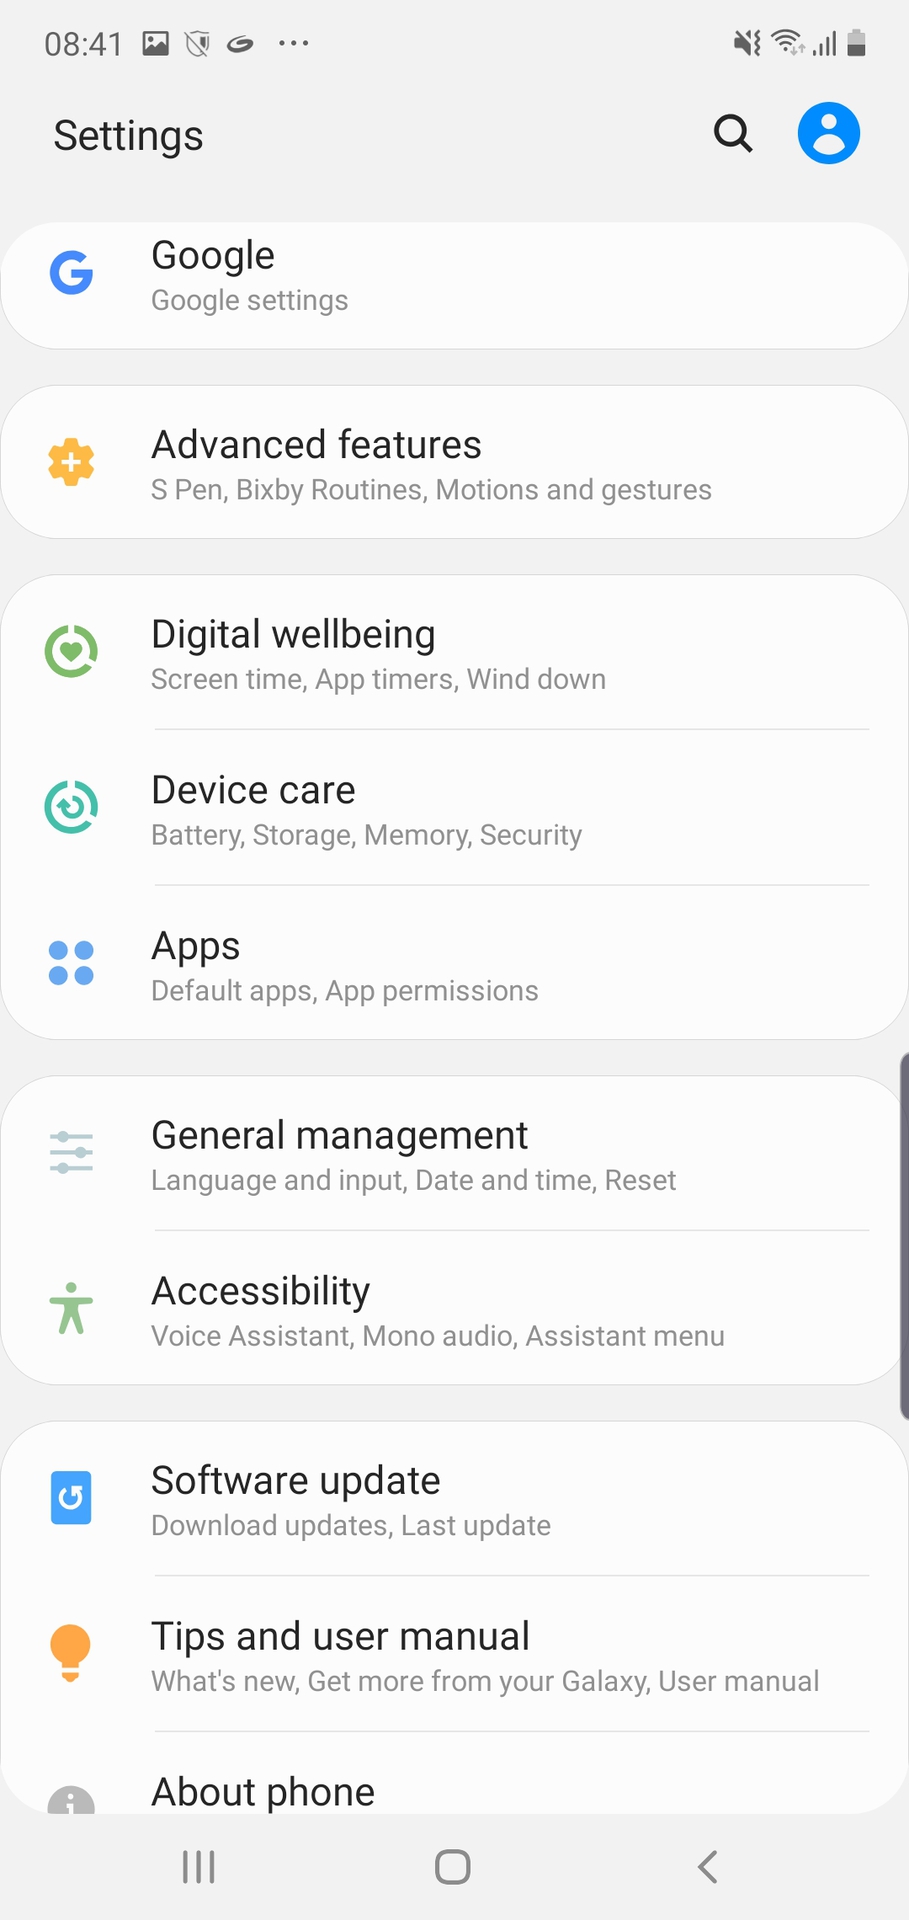 Samsung Note 10 settings page